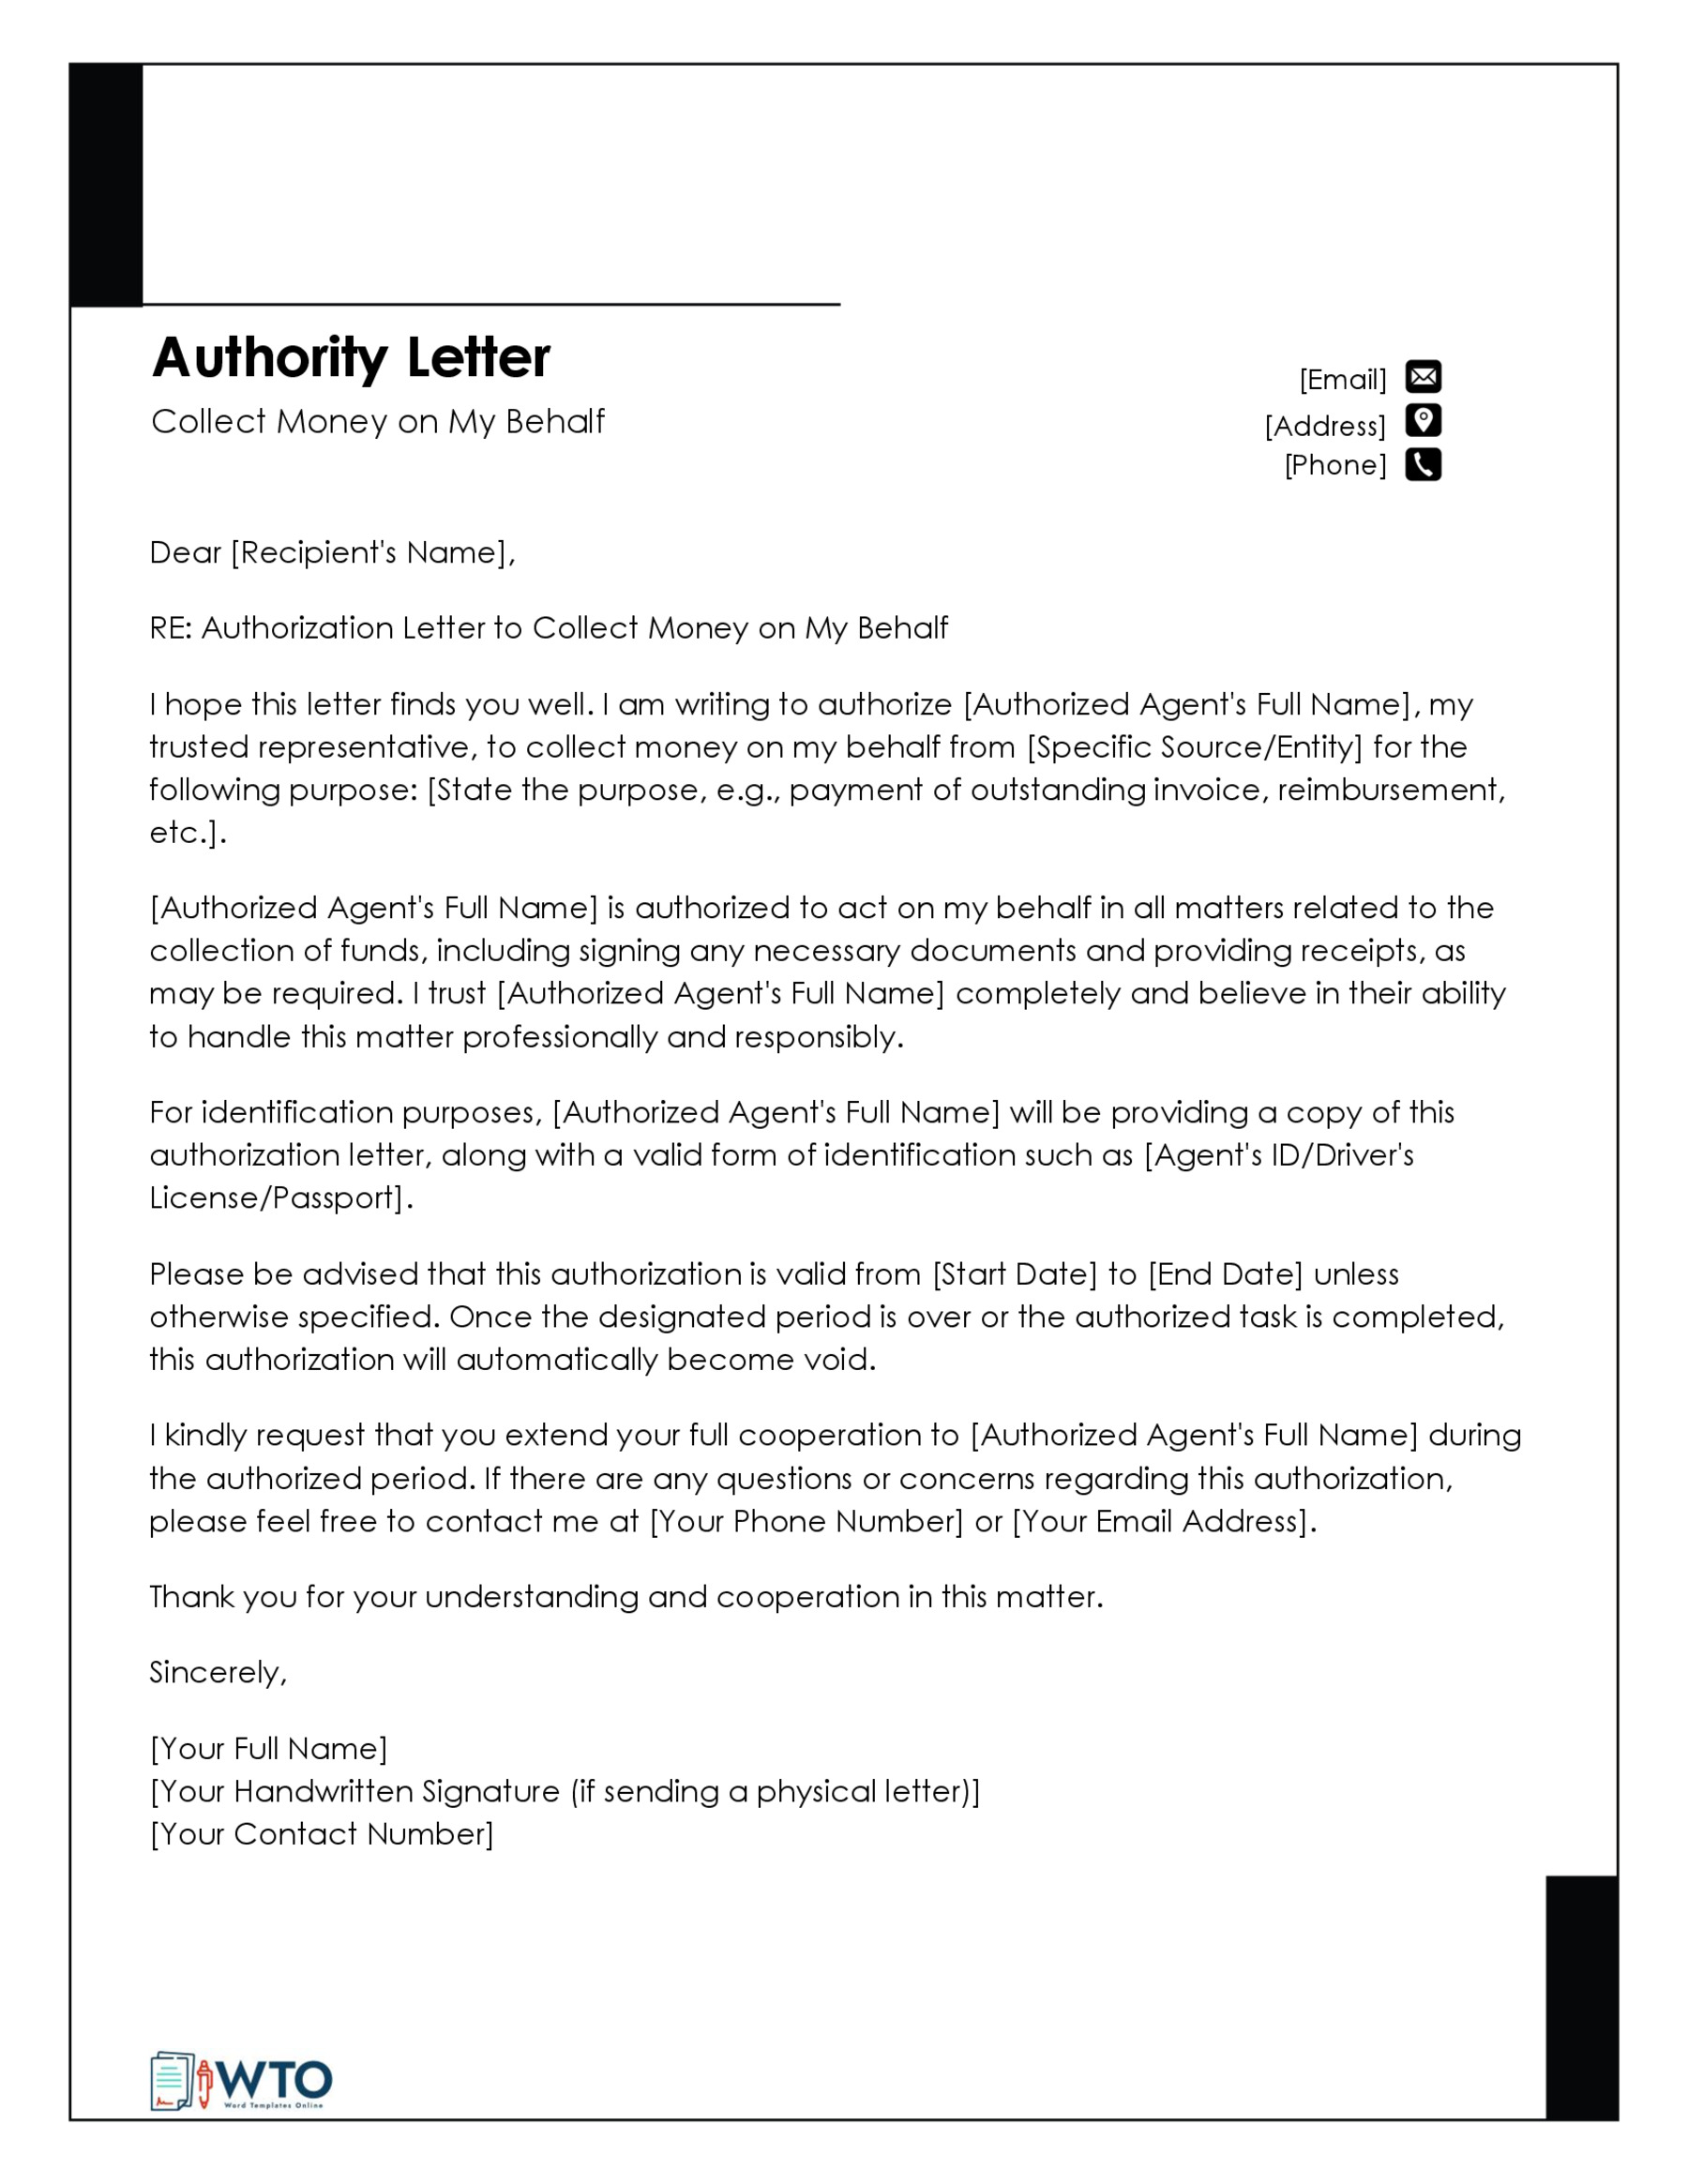 Sample Letter to Collect Money with Authorization